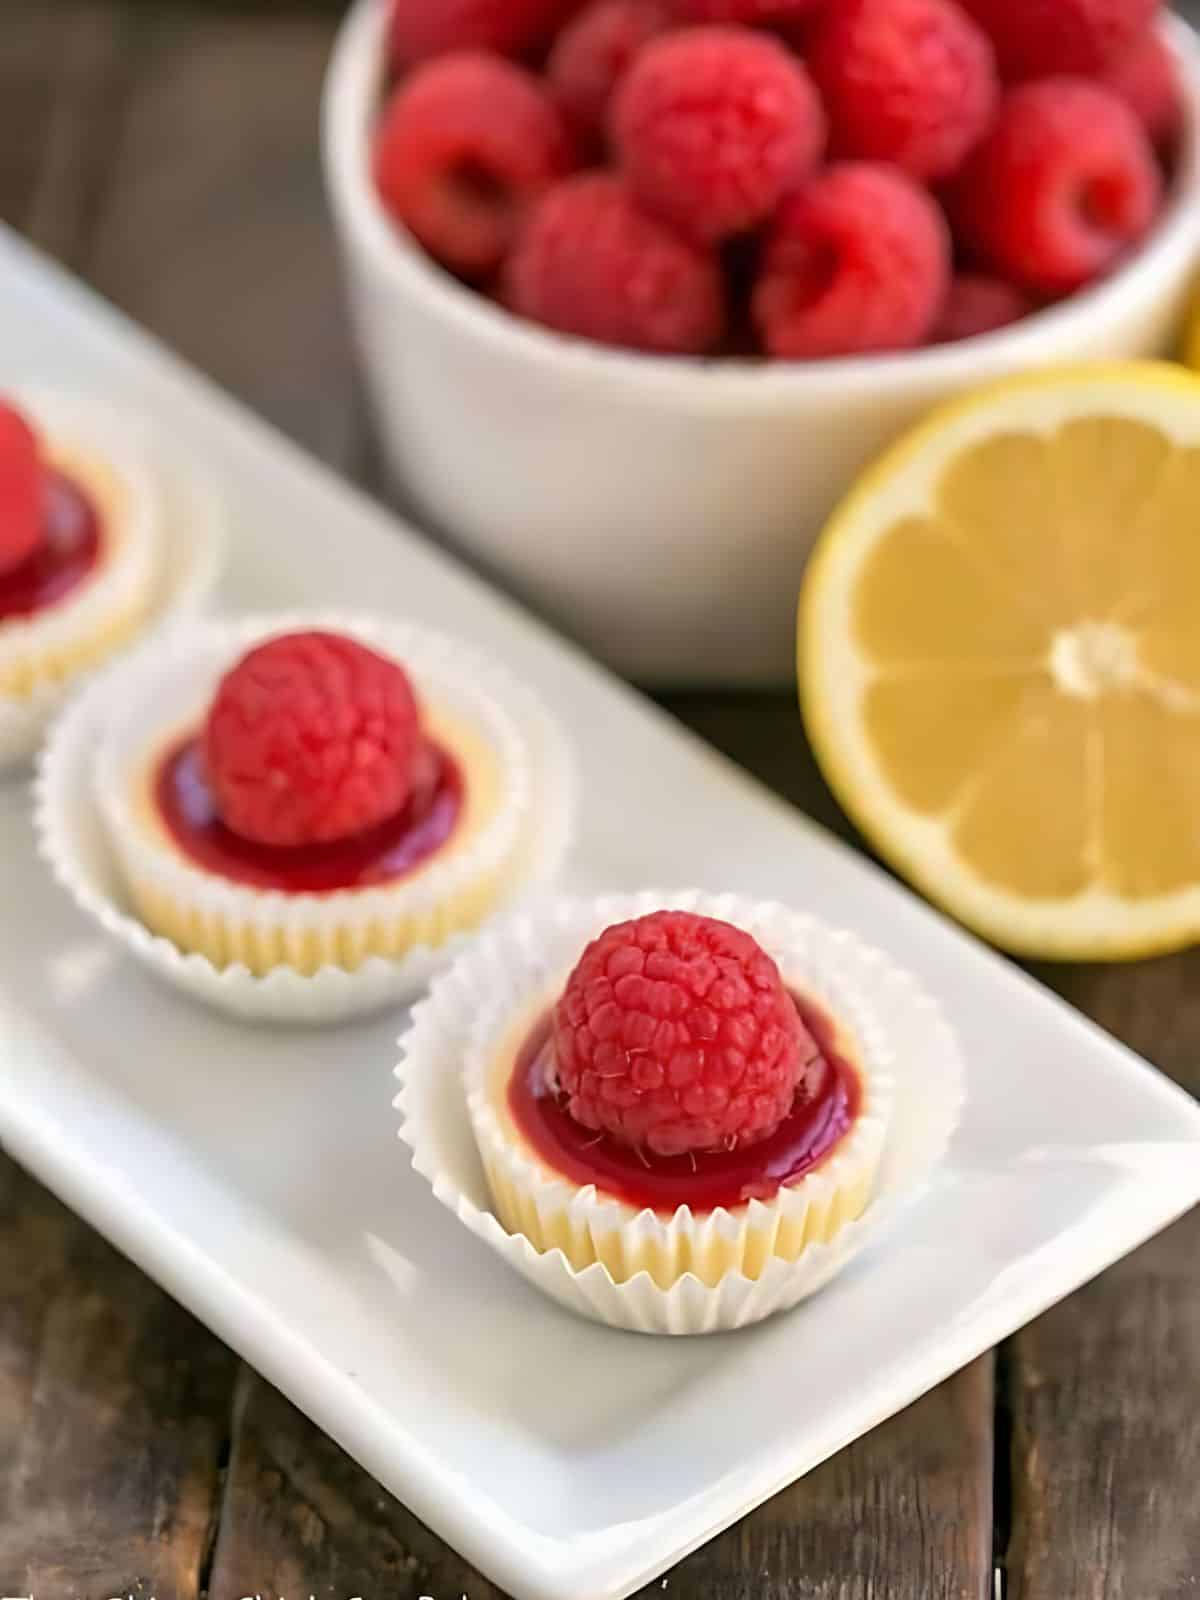 Mini cheesecakes with raspberries on top and raspberry filling.